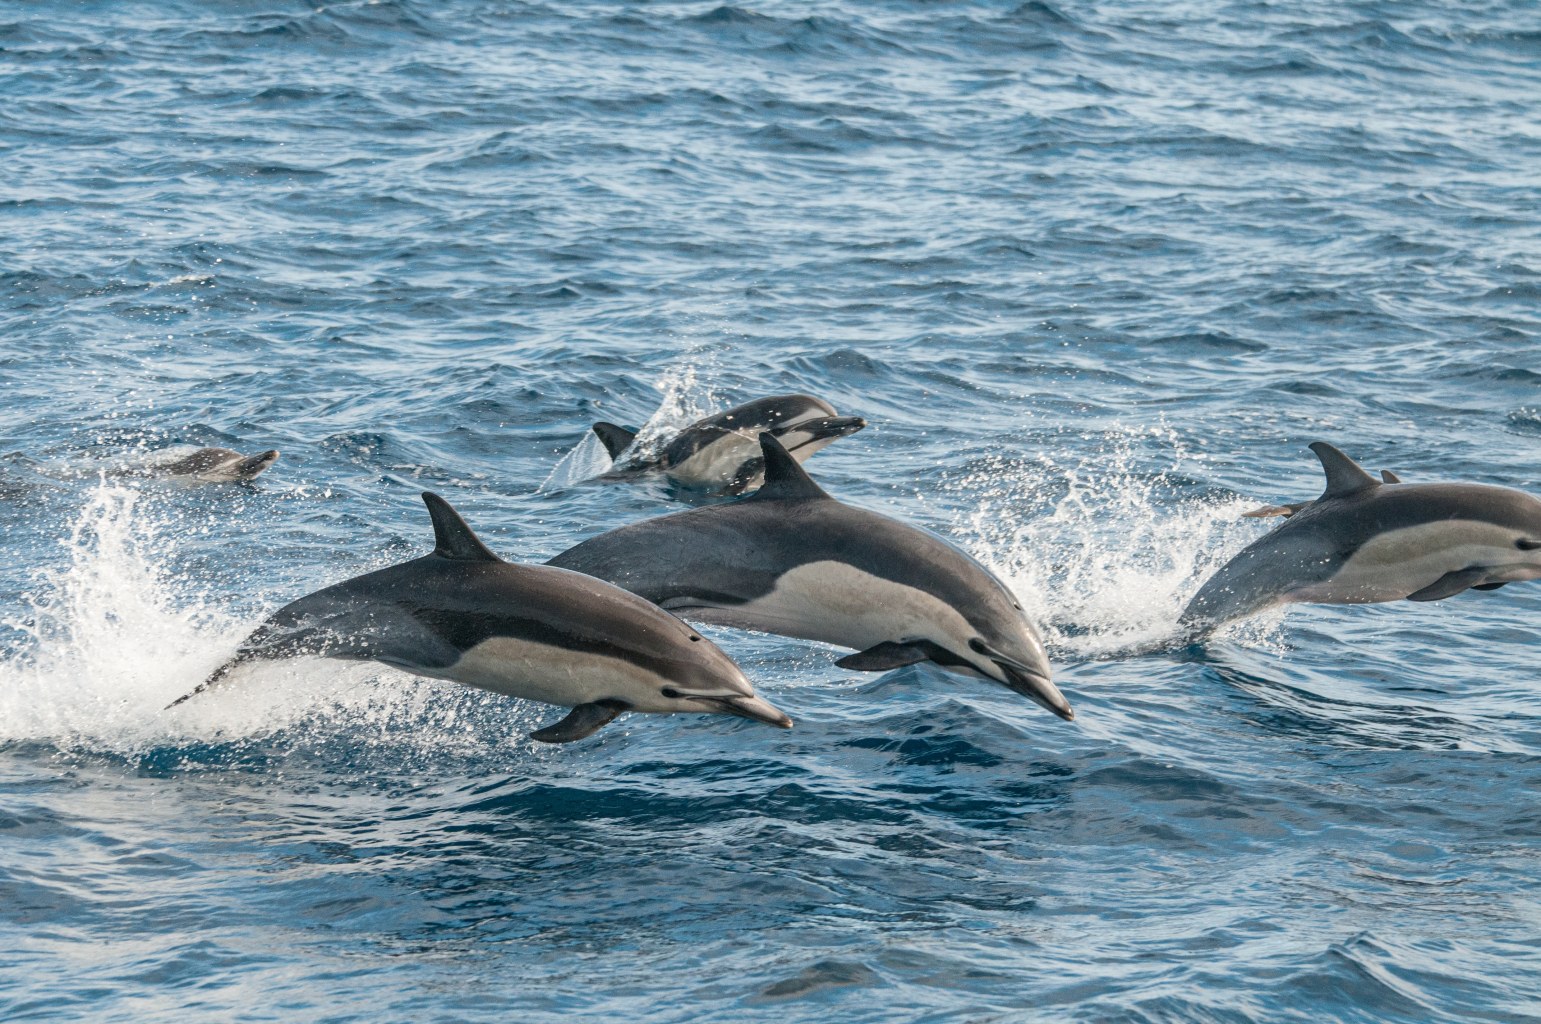 Wild Dolphins jumping 